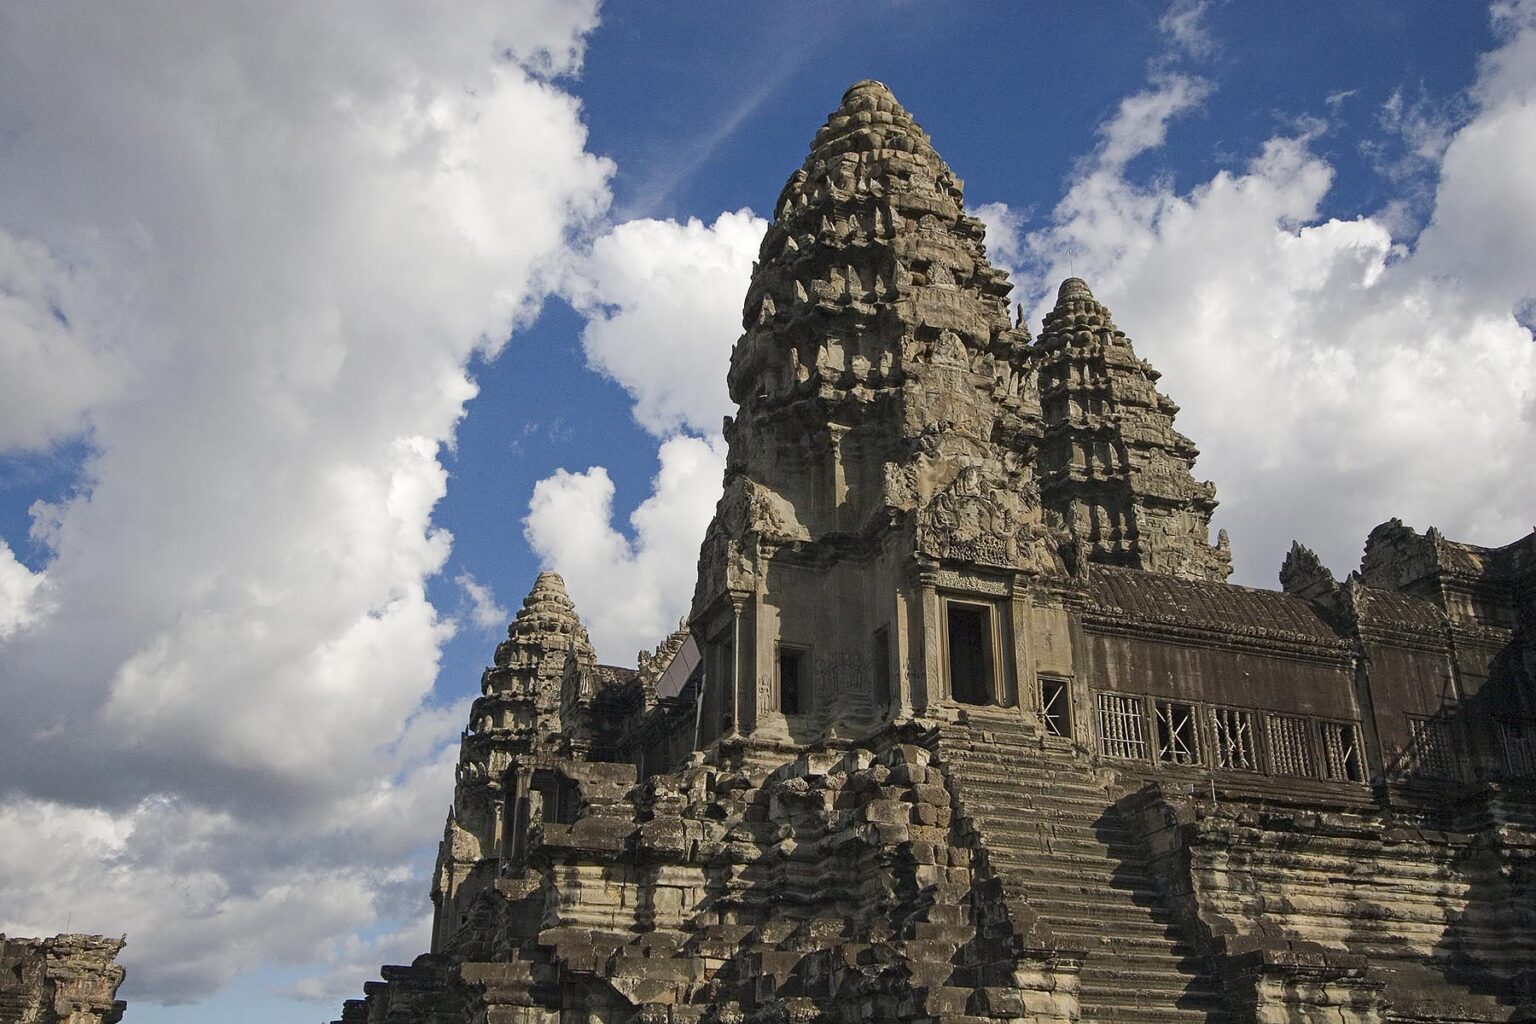 Stone temples representing the five peaks of Mount Meru at Angkor Wat, built in the 11th century by Suryavarman the 2nd, - Cambodia